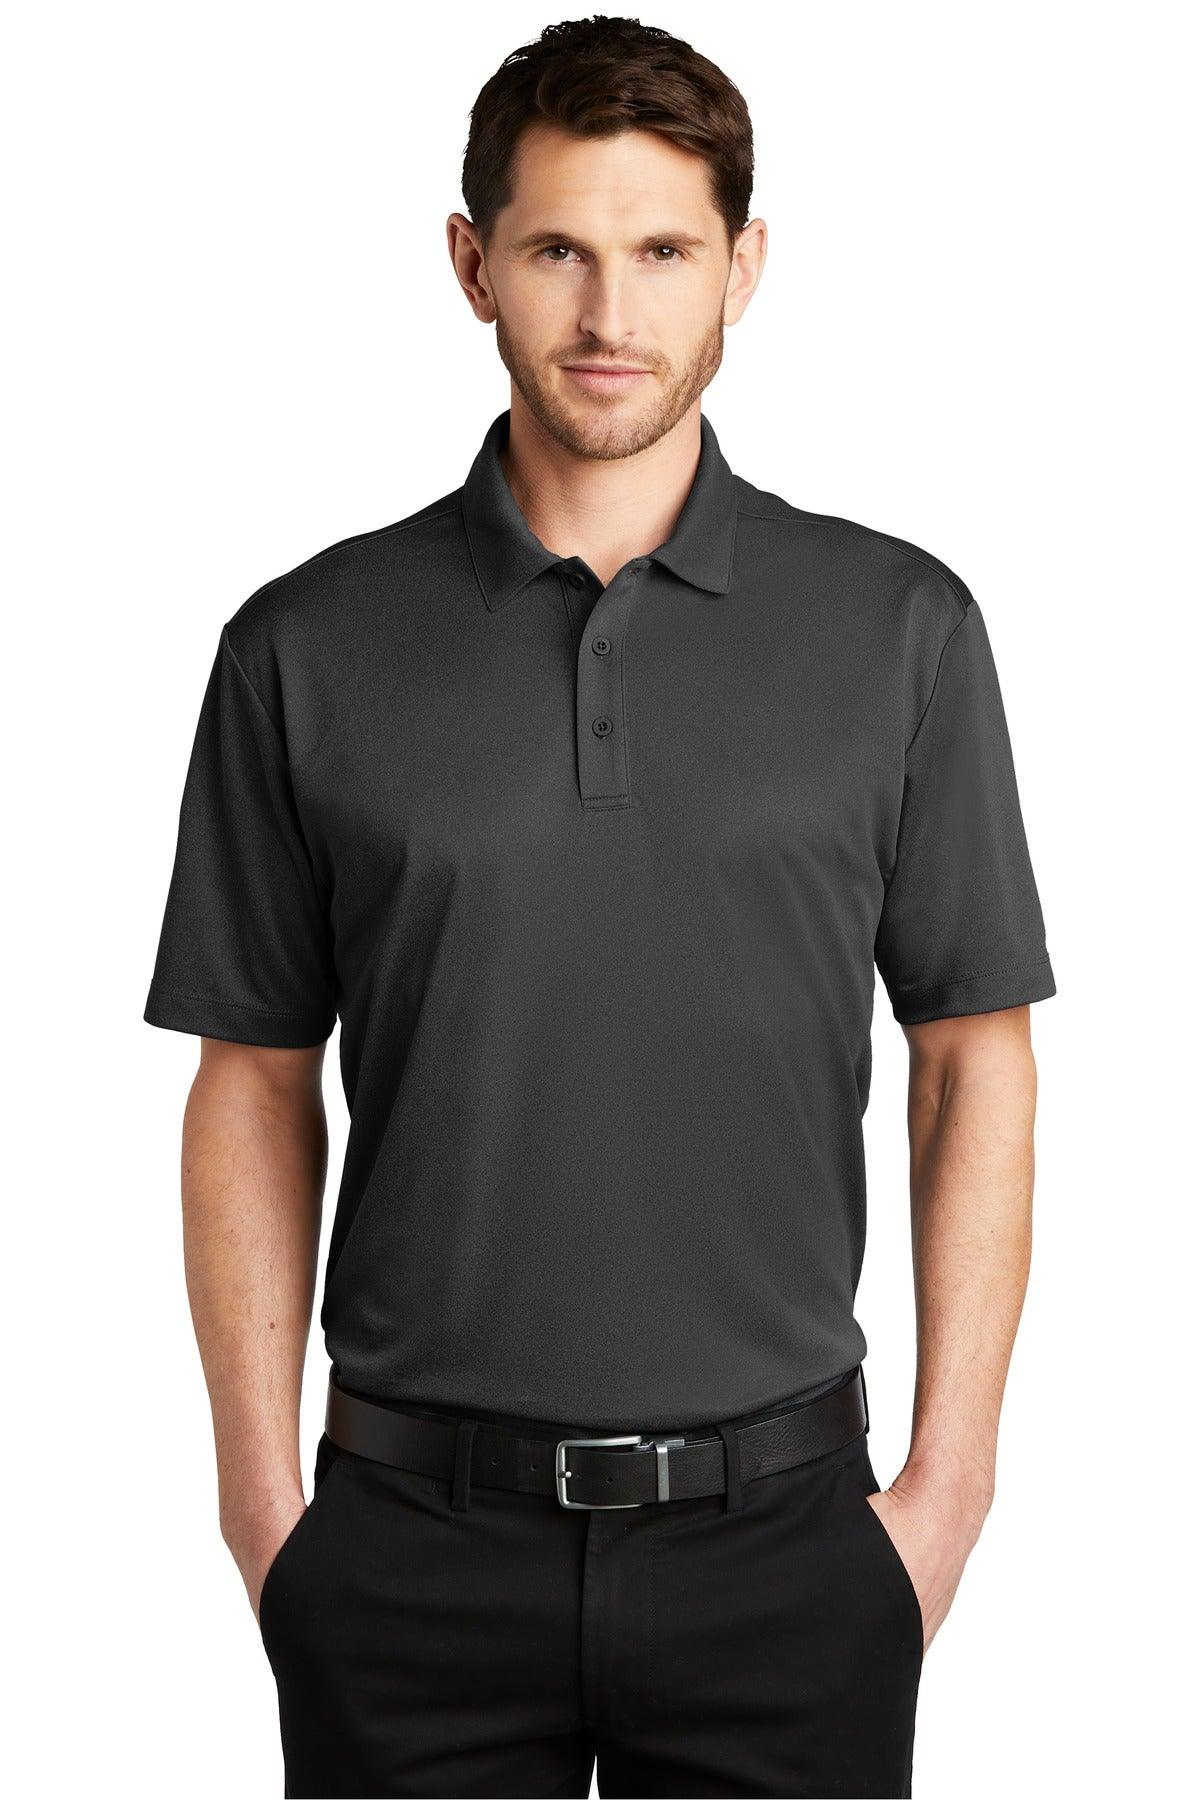 Port Authority Heathered Silk Touch Performance Polo. K542 - Dresses Max